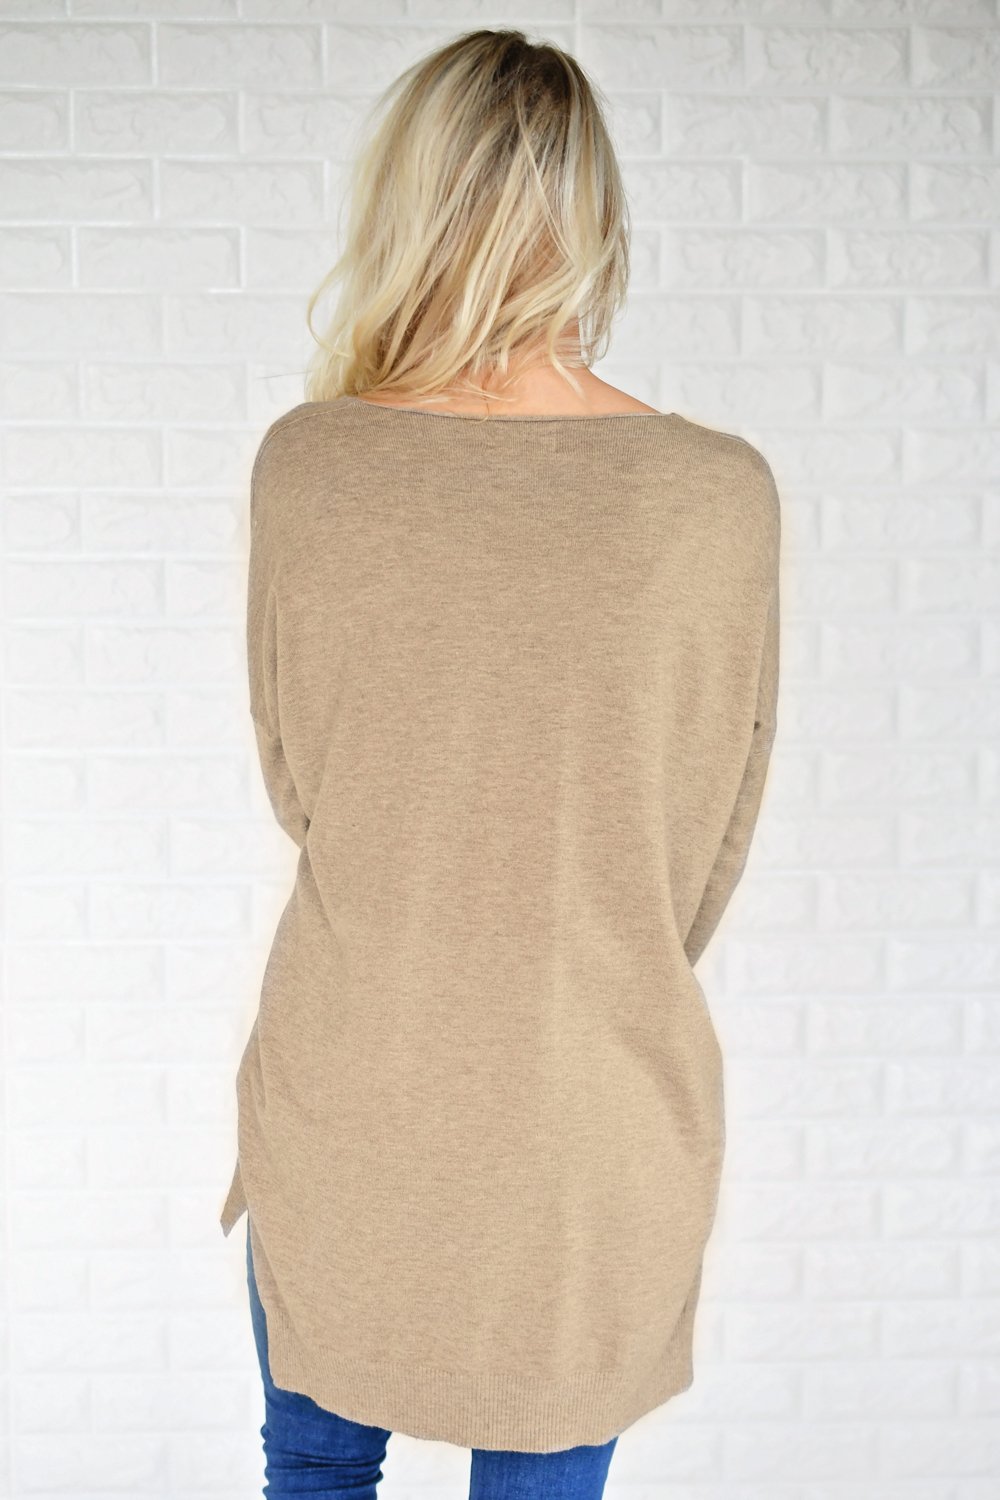 Hold On To Me Sweater ~ Mocha